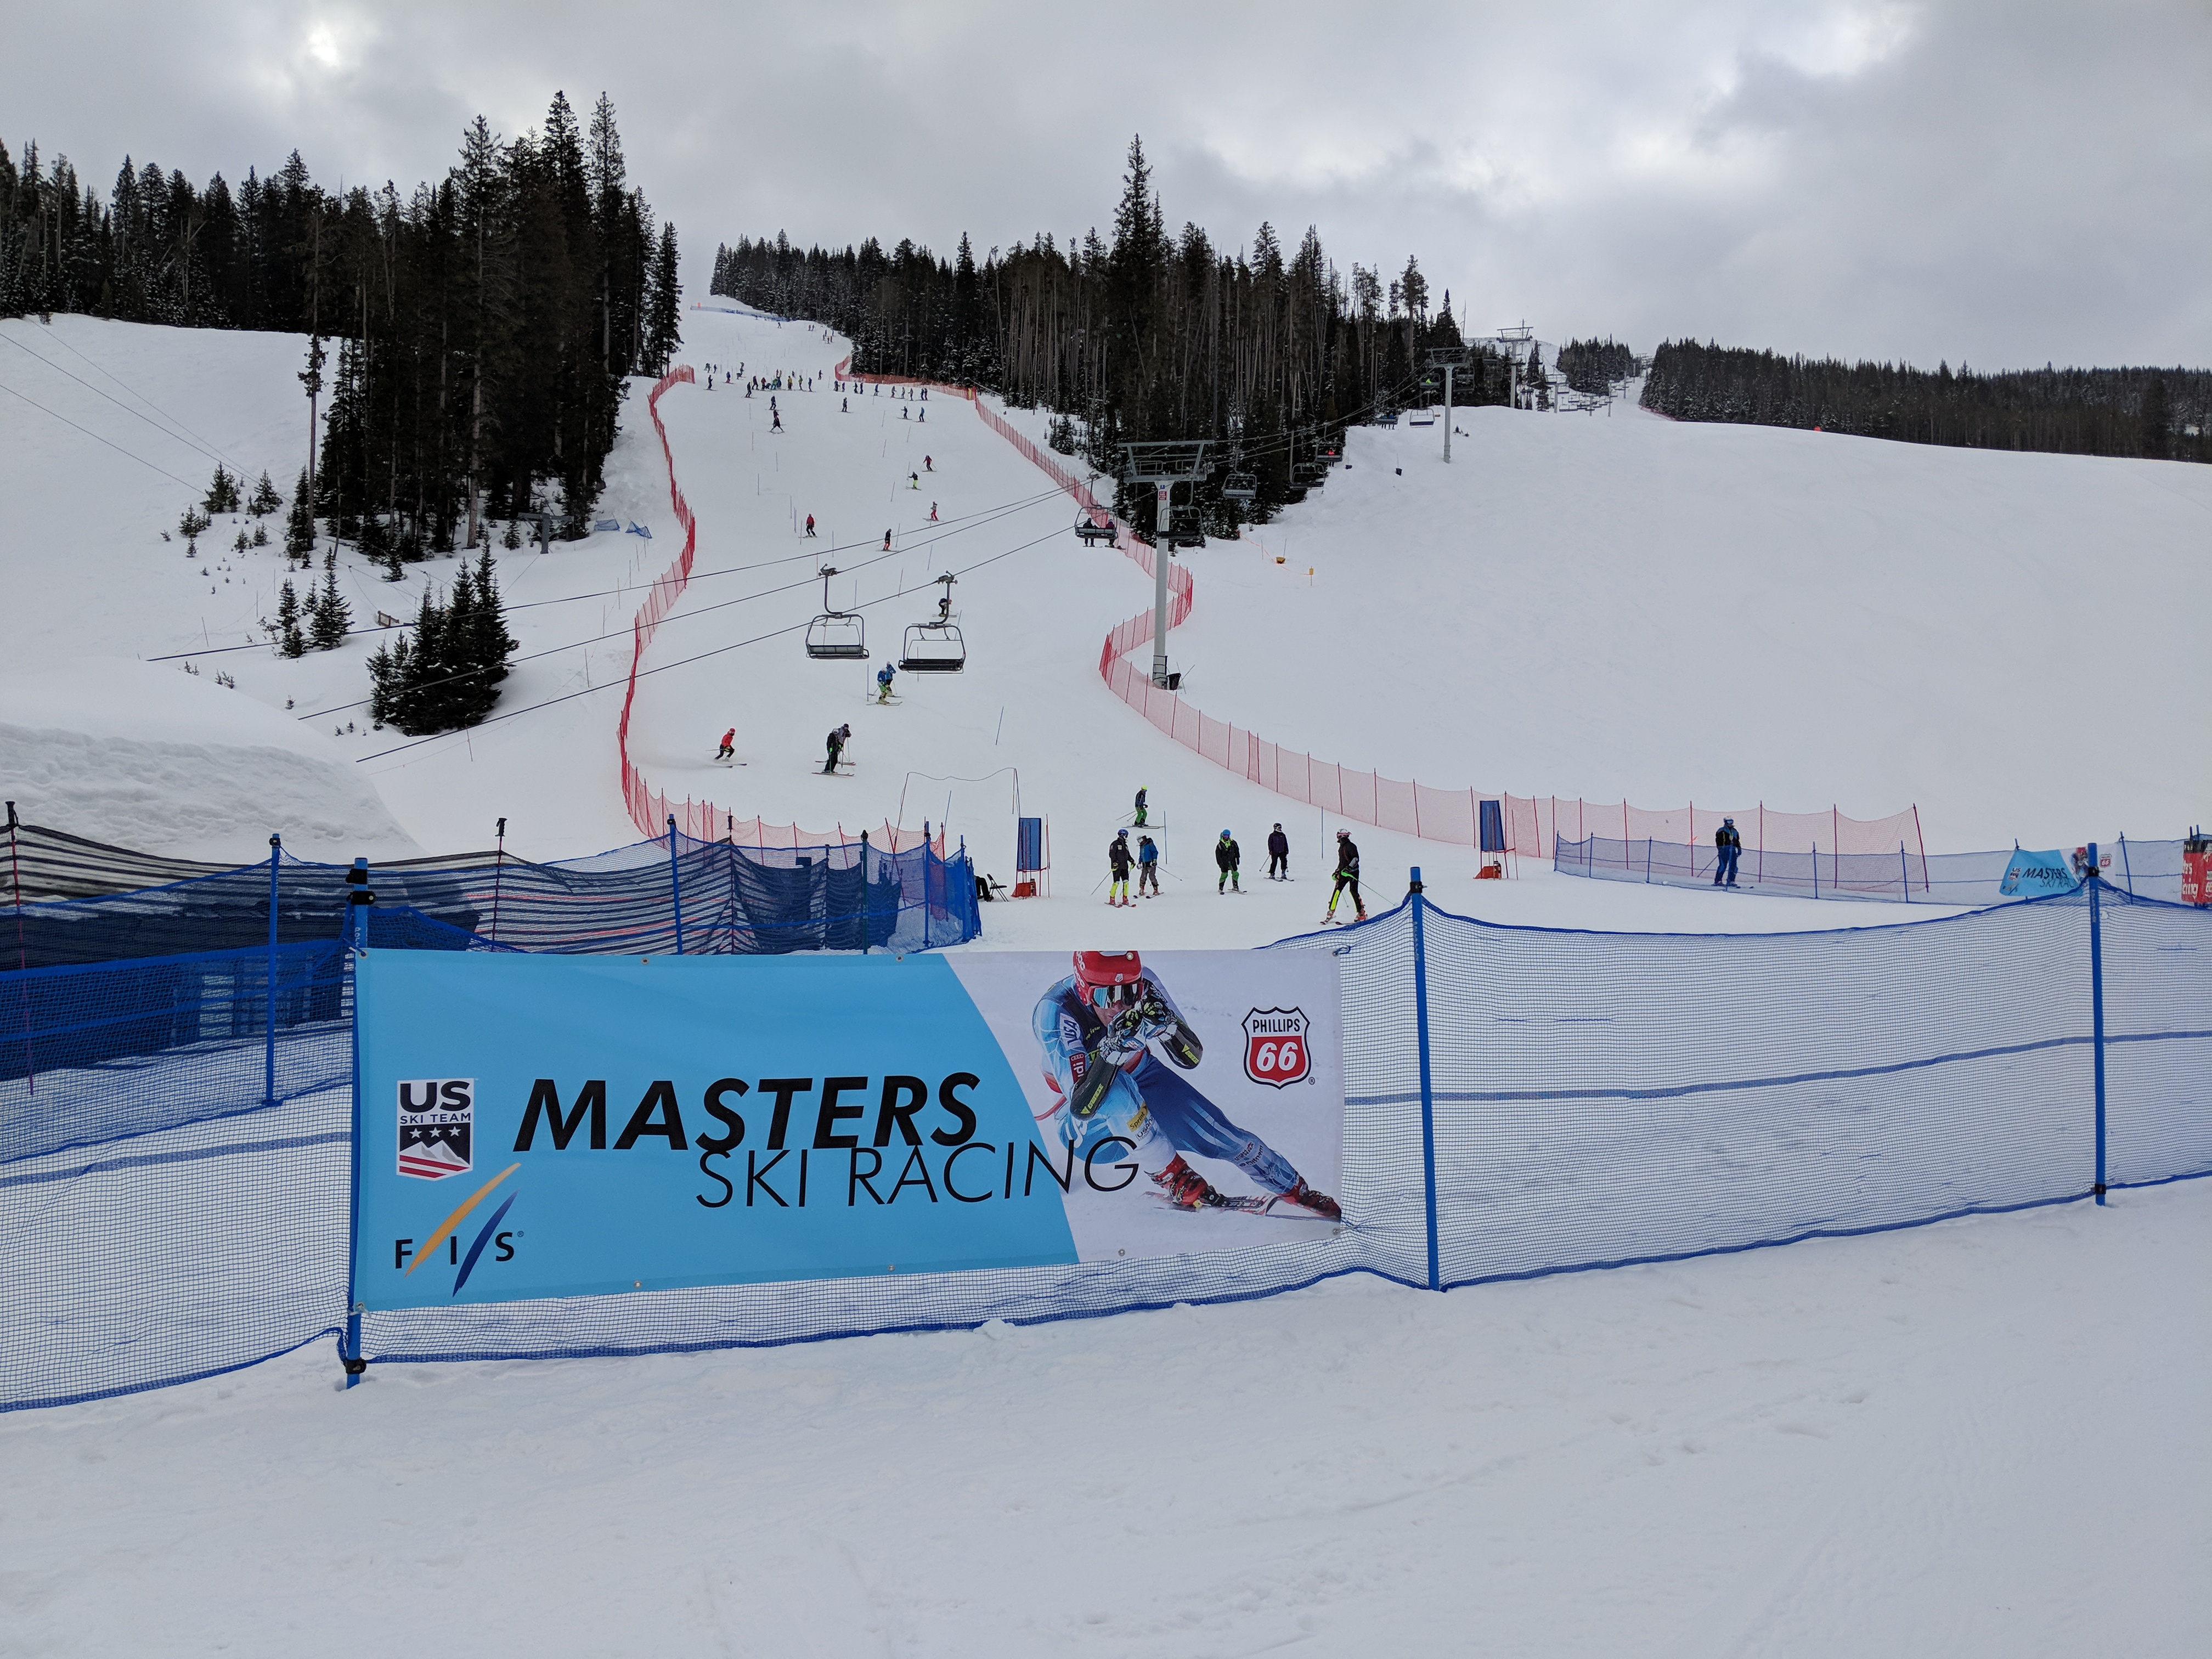 SL Course at the 2018 FIS Masters World Criterium in Big Sky, MT